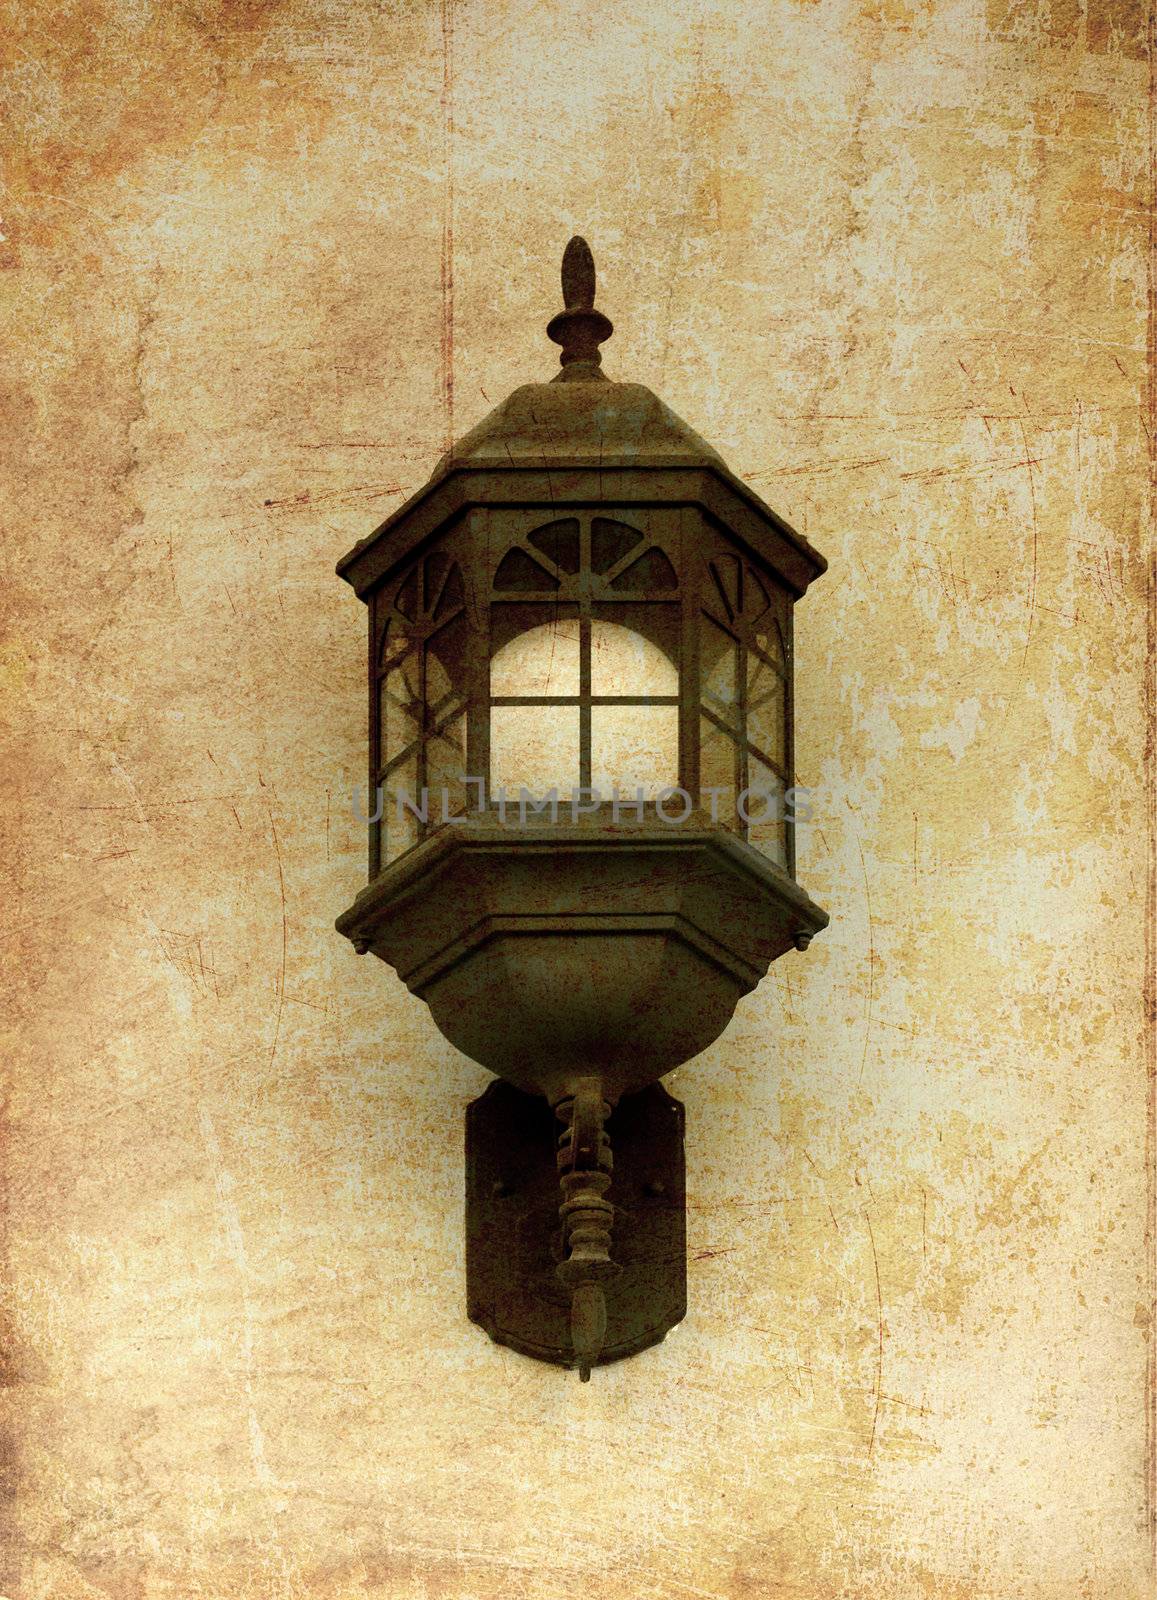 Vintage street lamp, photo in old image style by nuchylee